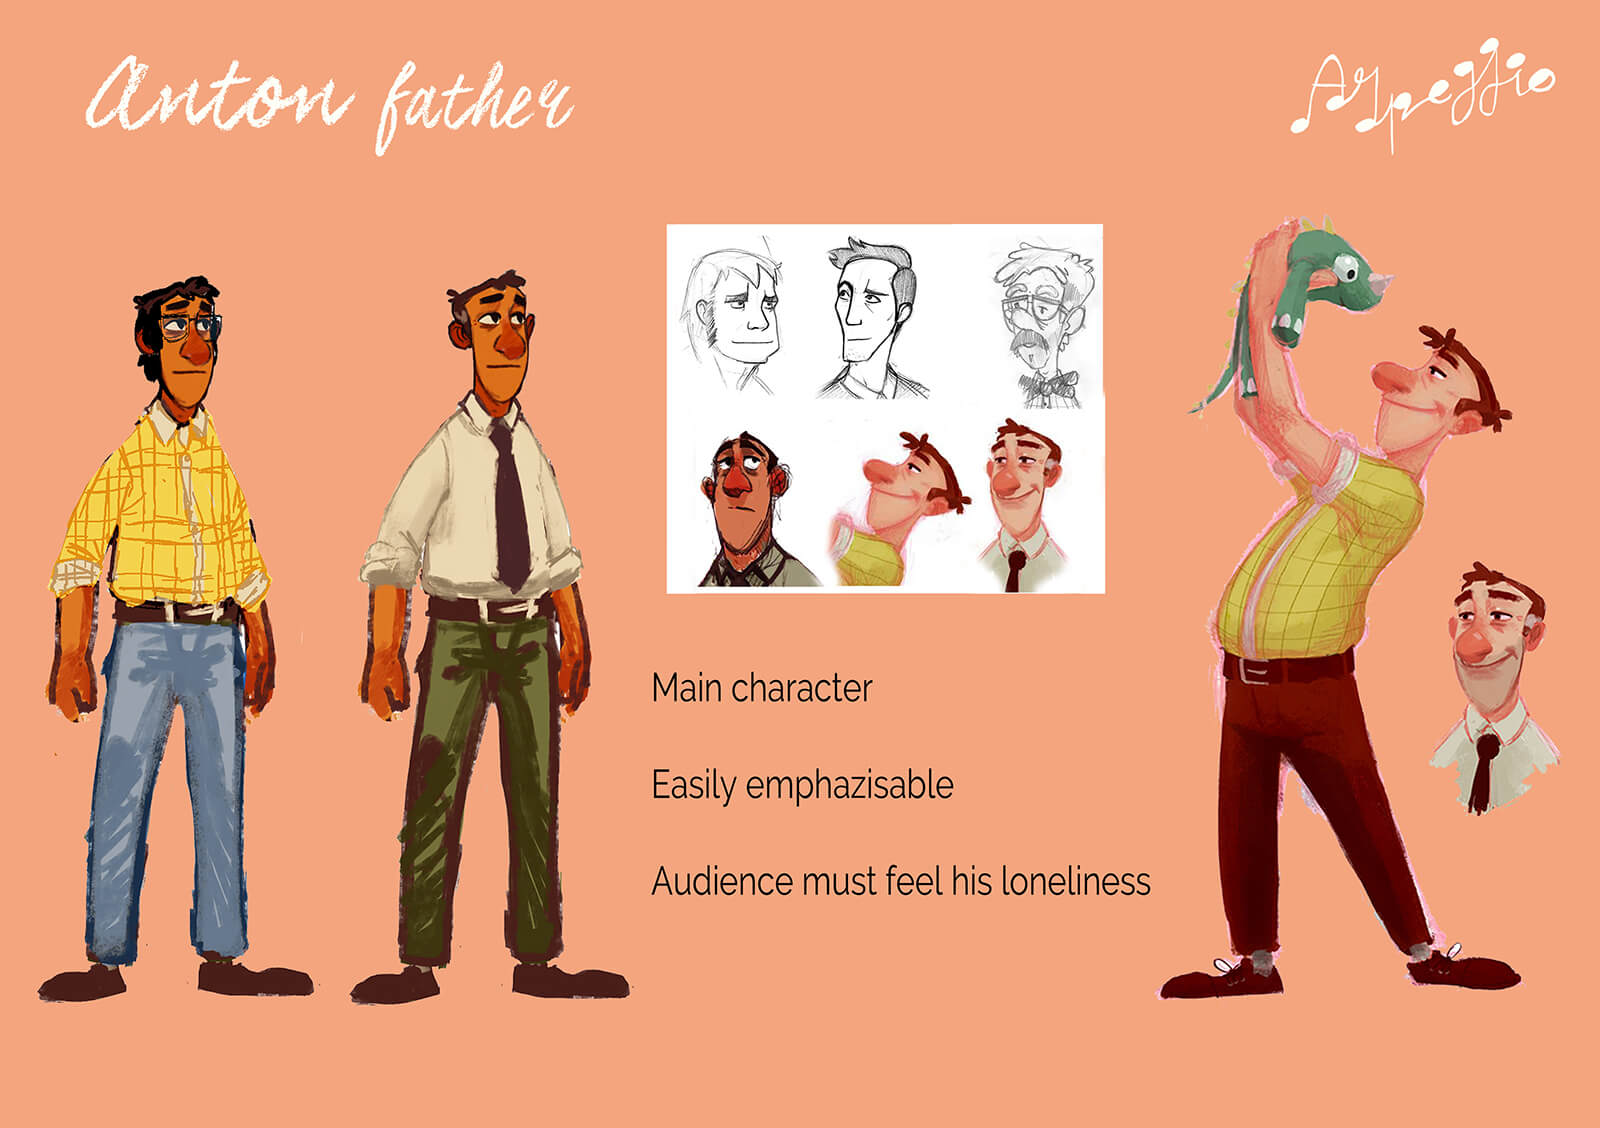 Character concept for the father, Anton, from the film Arpeggio, including initial sketches and traits